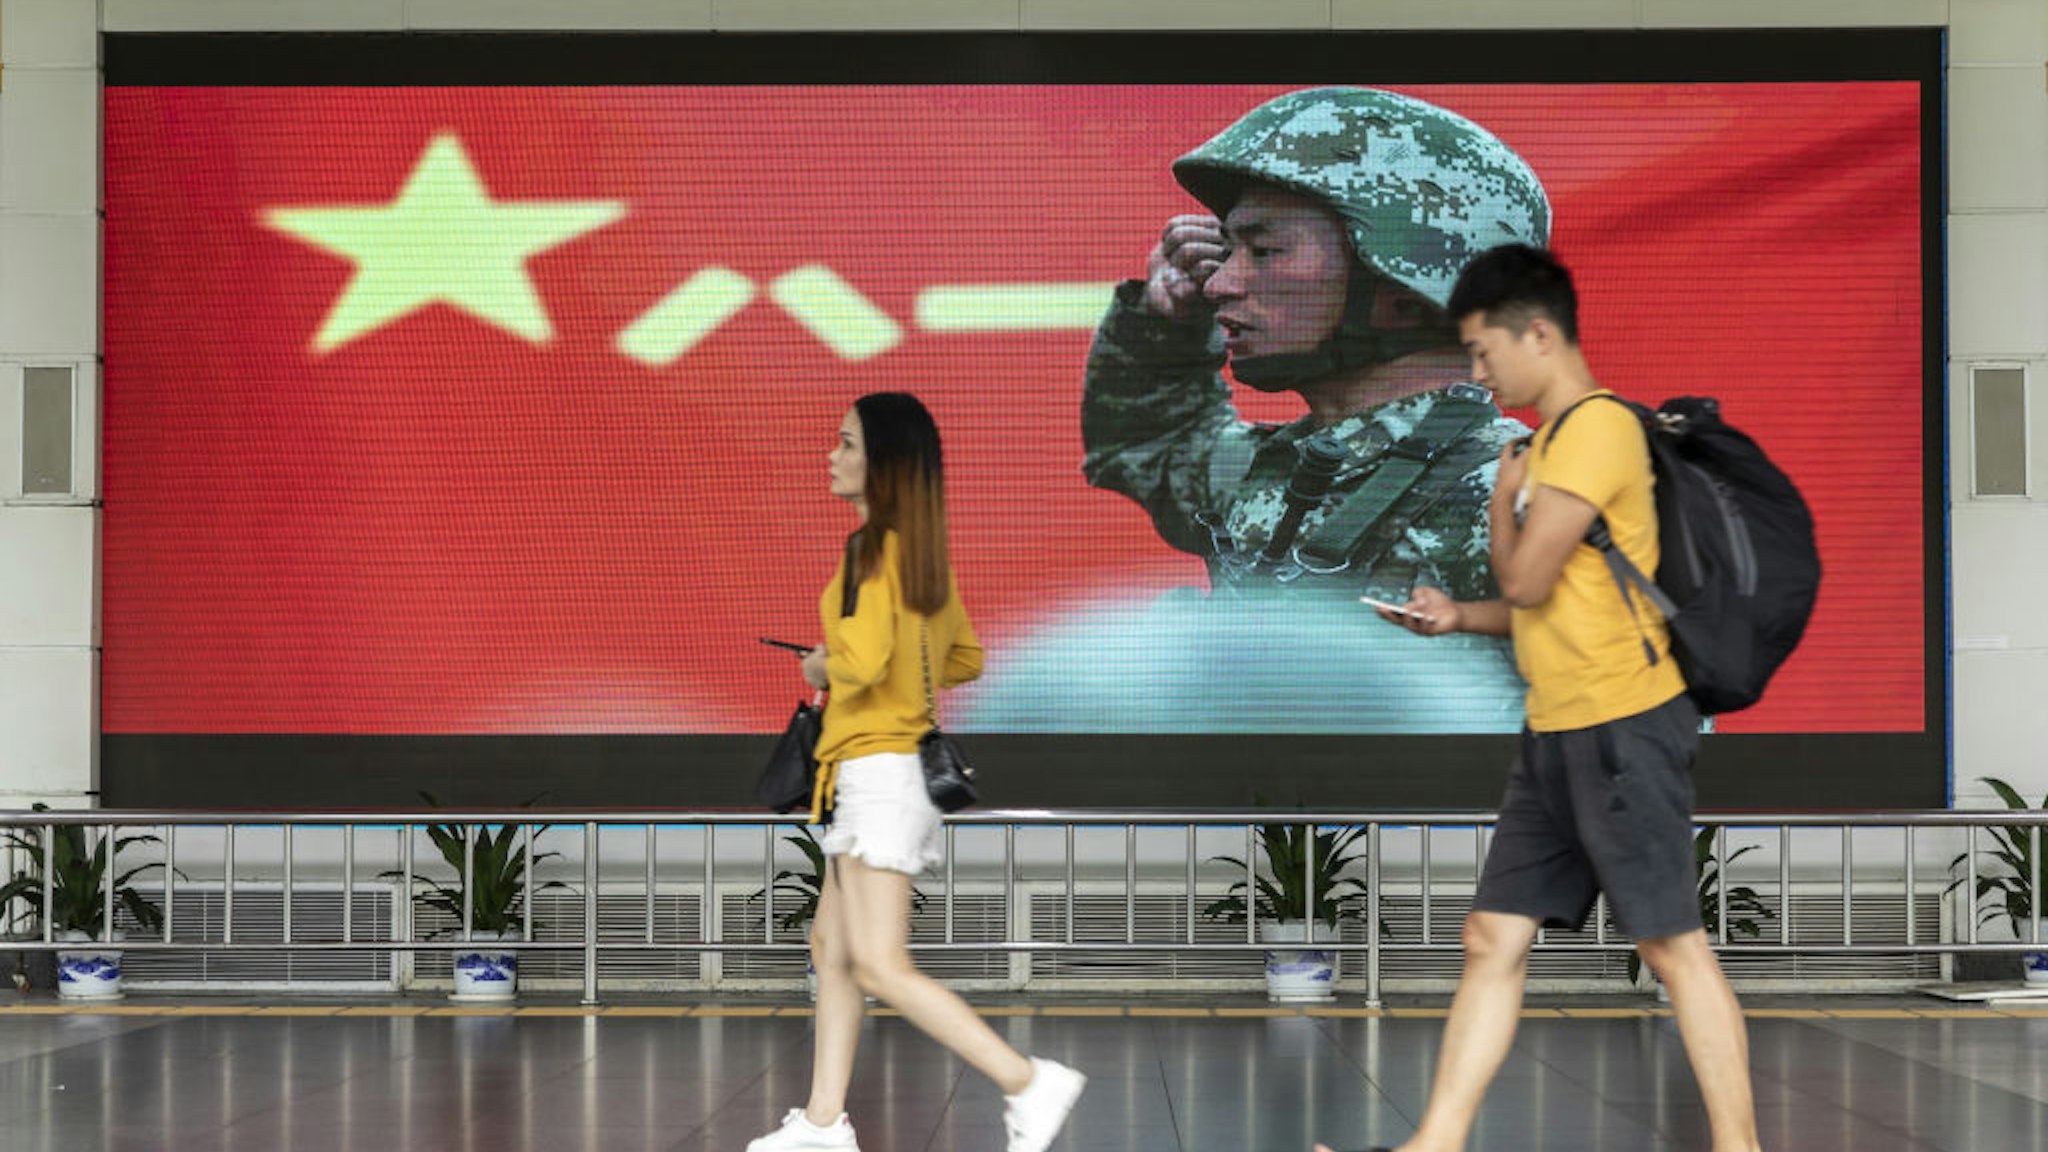 Pedestrians walk past an advertisement for the People's Liberation Army (PLA) on a screen near the Luohu border crossing in Shenzhen, China, on Thursday, Aug. 15, 2019.